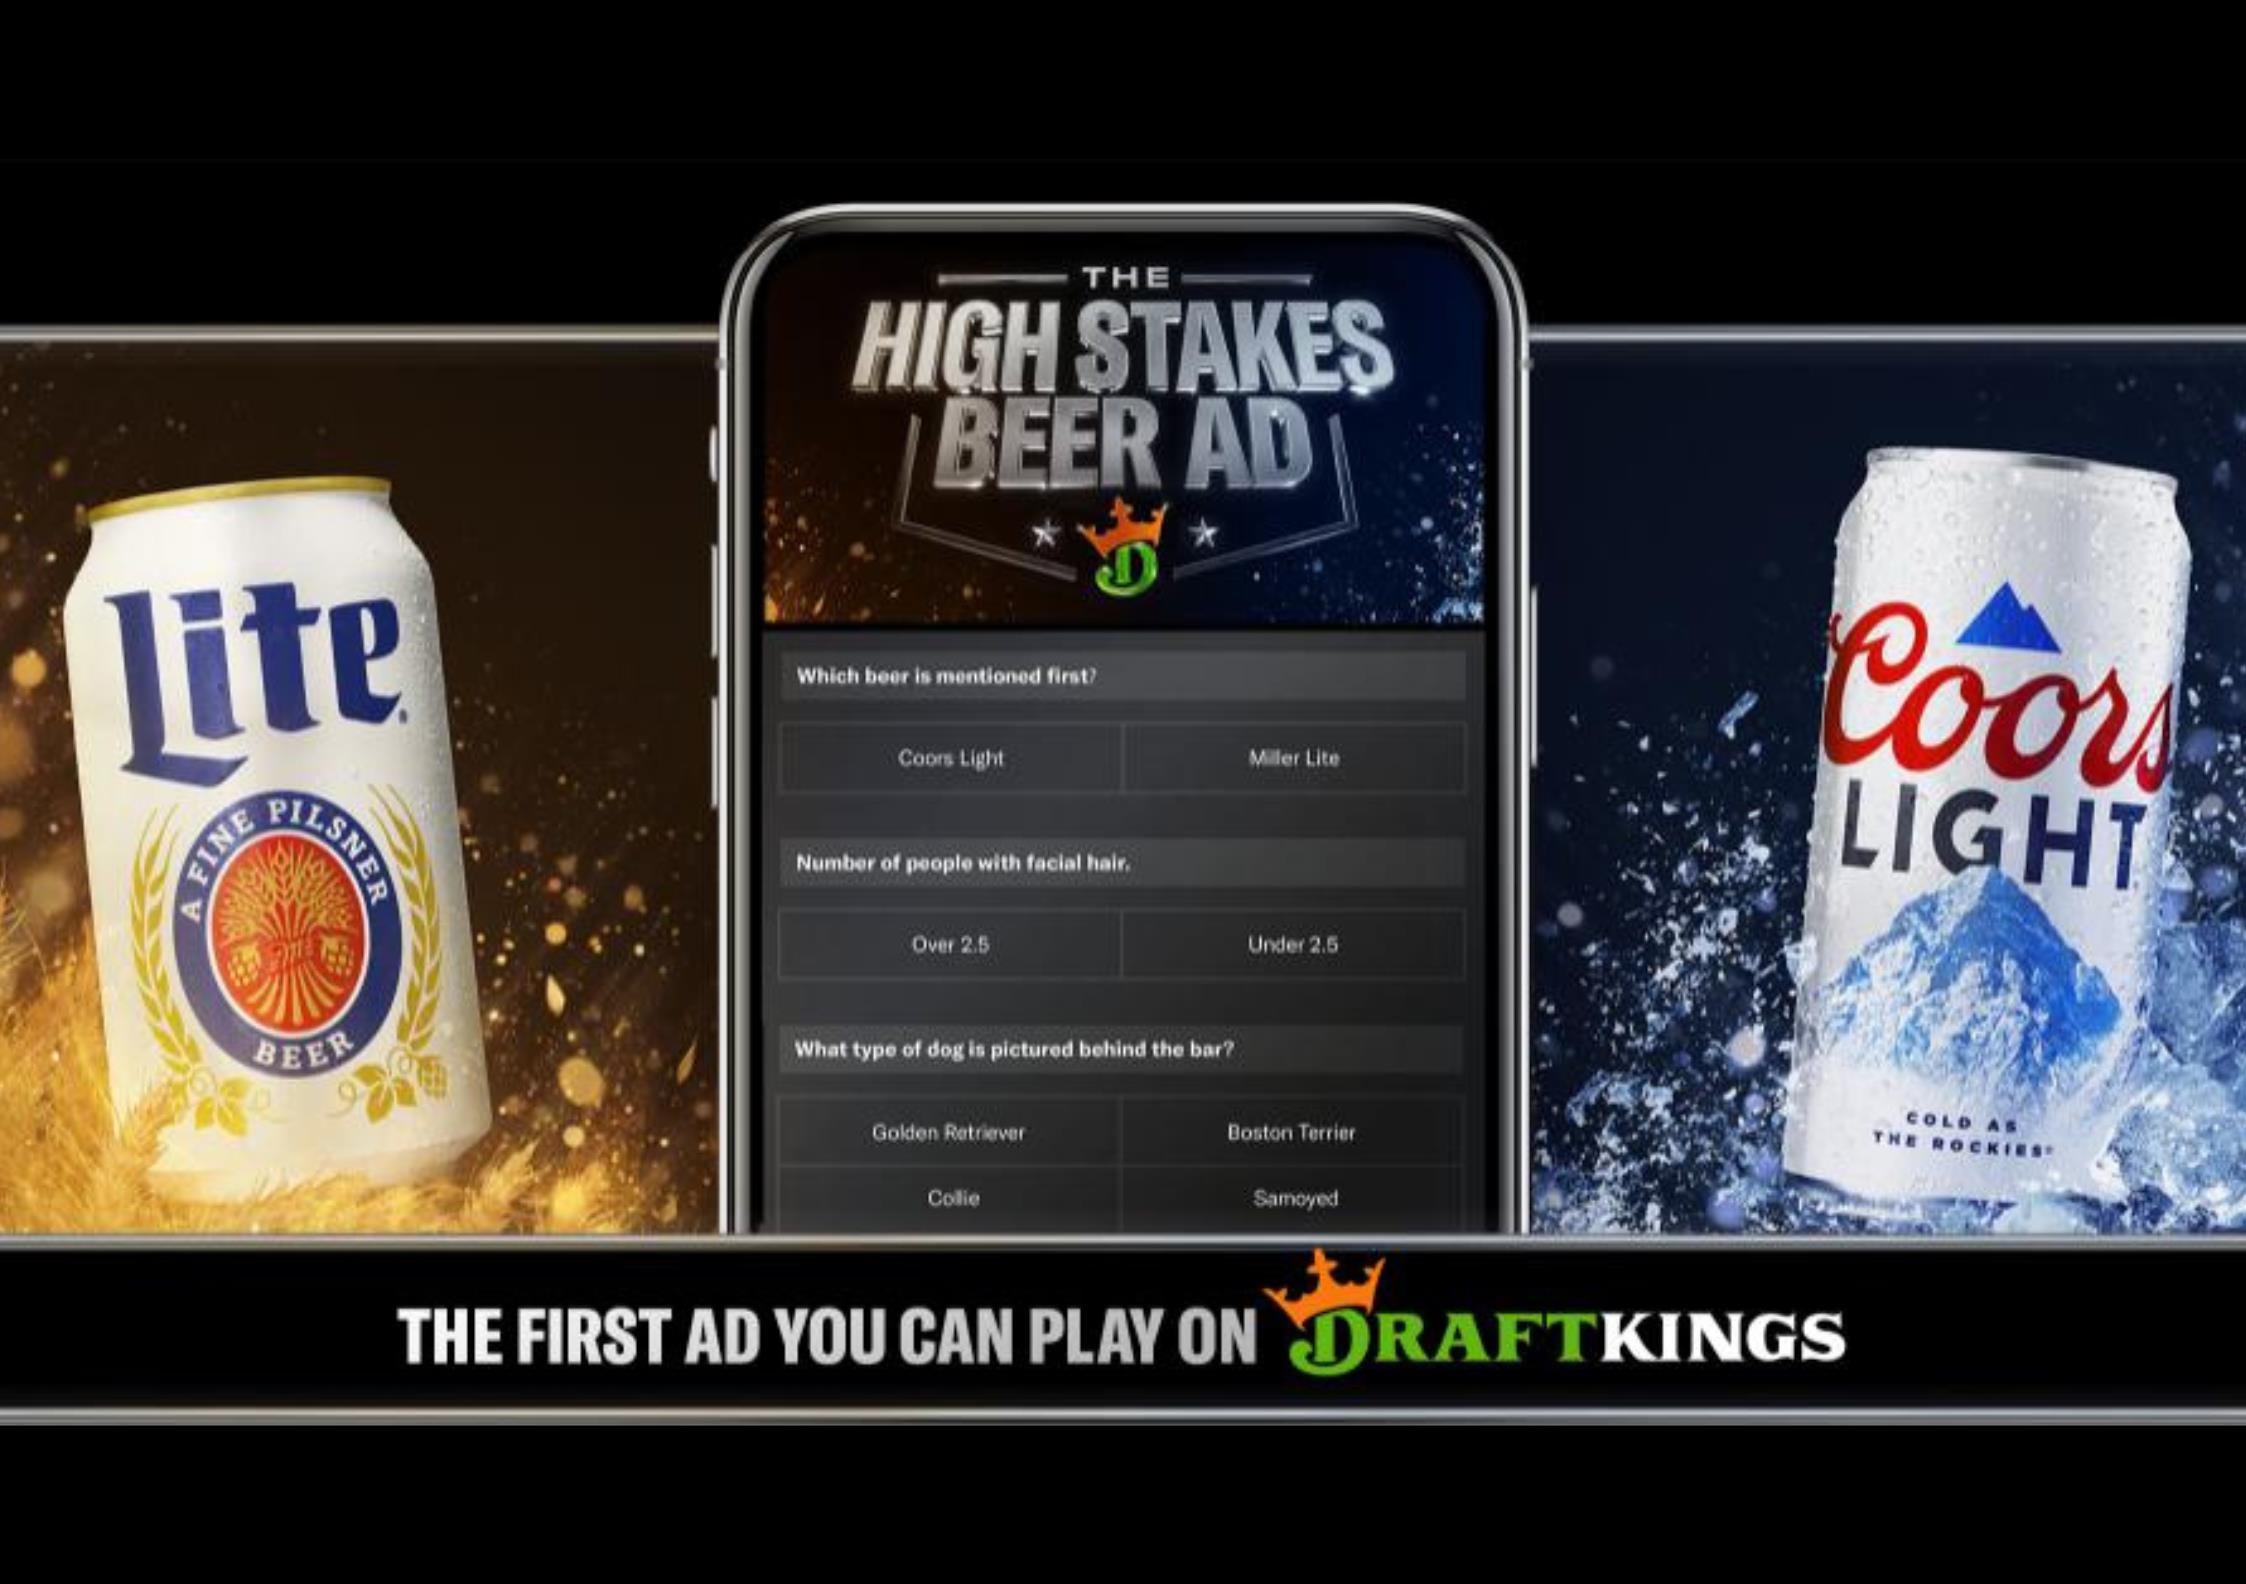 For Super Bowl Ad, Coors Light Brewer Taps Into Online Sports-Betting Appetite